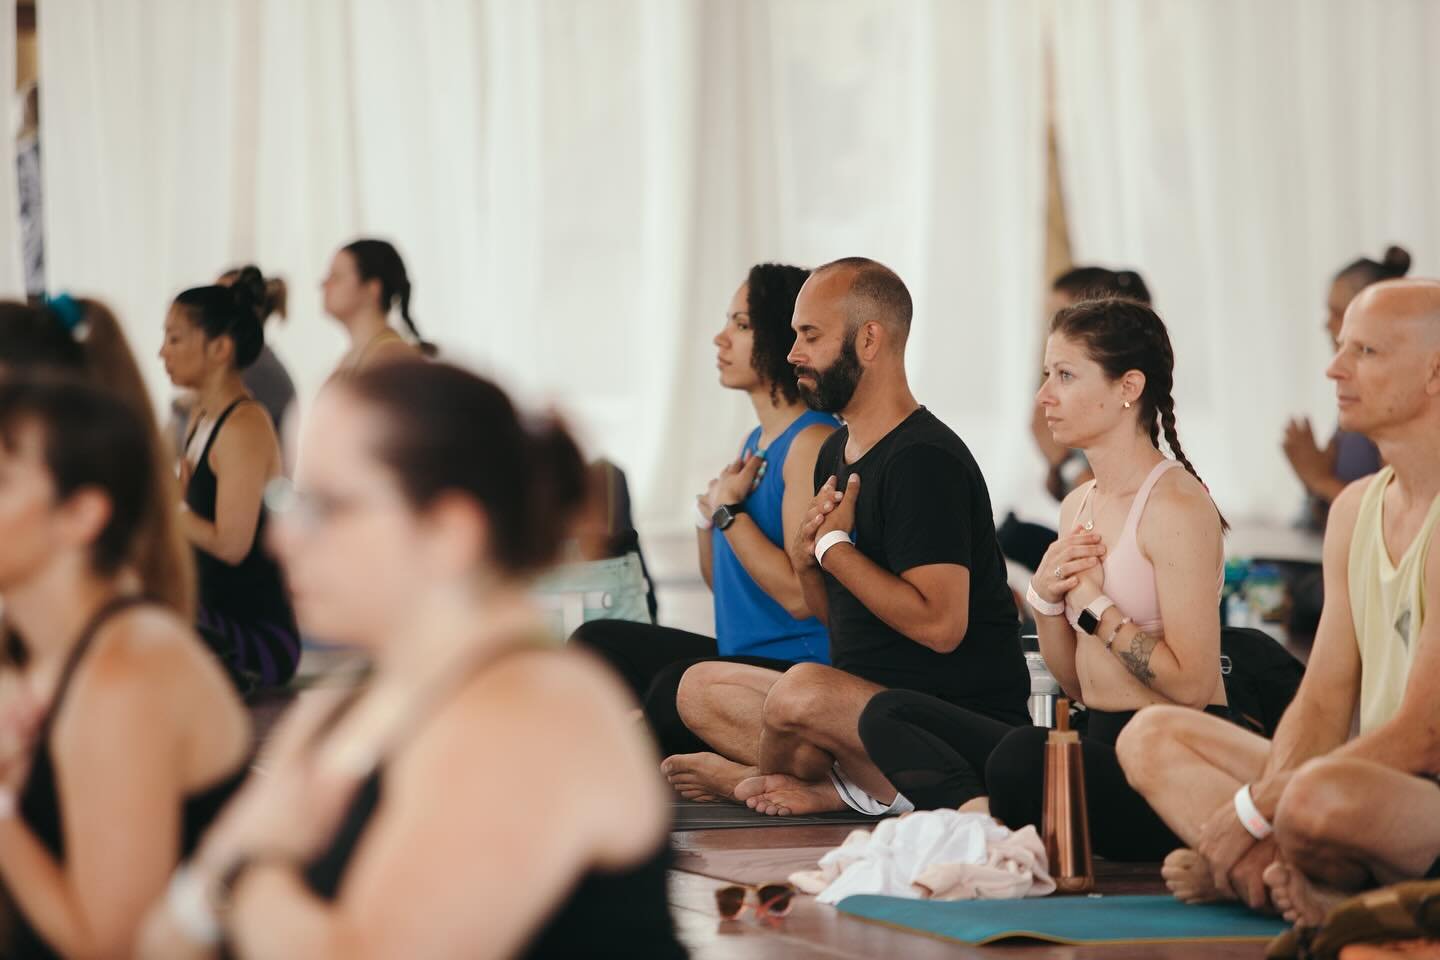 Countdown to @cityofom is on! Less than a month away &mdash; do you have your ticket? Don't miss out on Ottawa&rsquo;s largest health and wellness festival. 

What started as a yoga festival, has now evolved into much more. The majority of the festiv